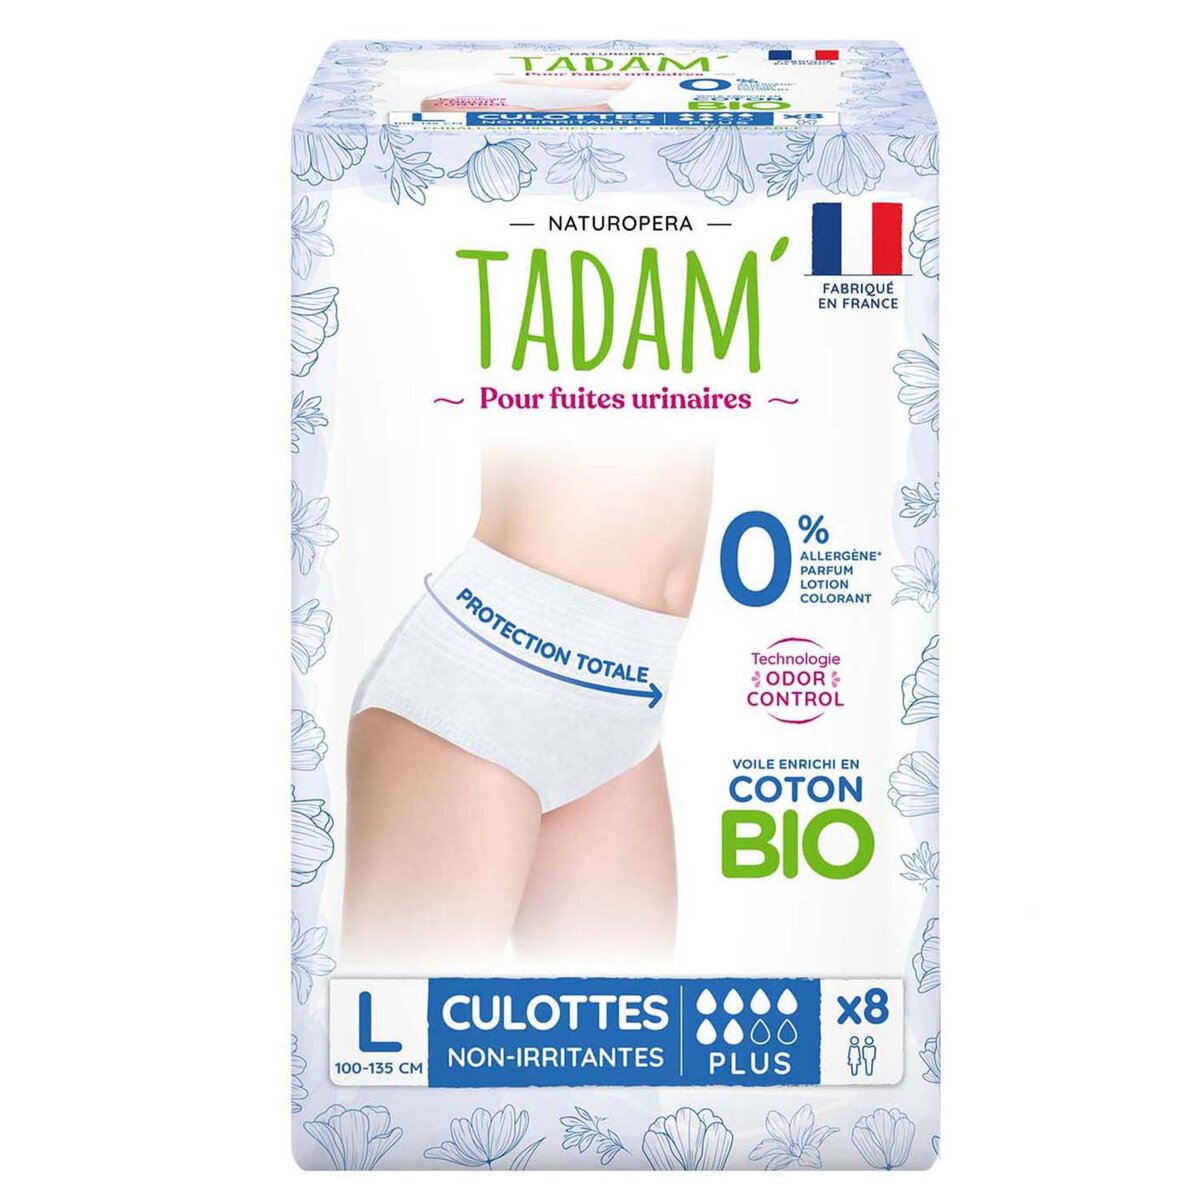 ALWAYS Discreet culottes incontinence normal taille L 10 culottes pas cher  